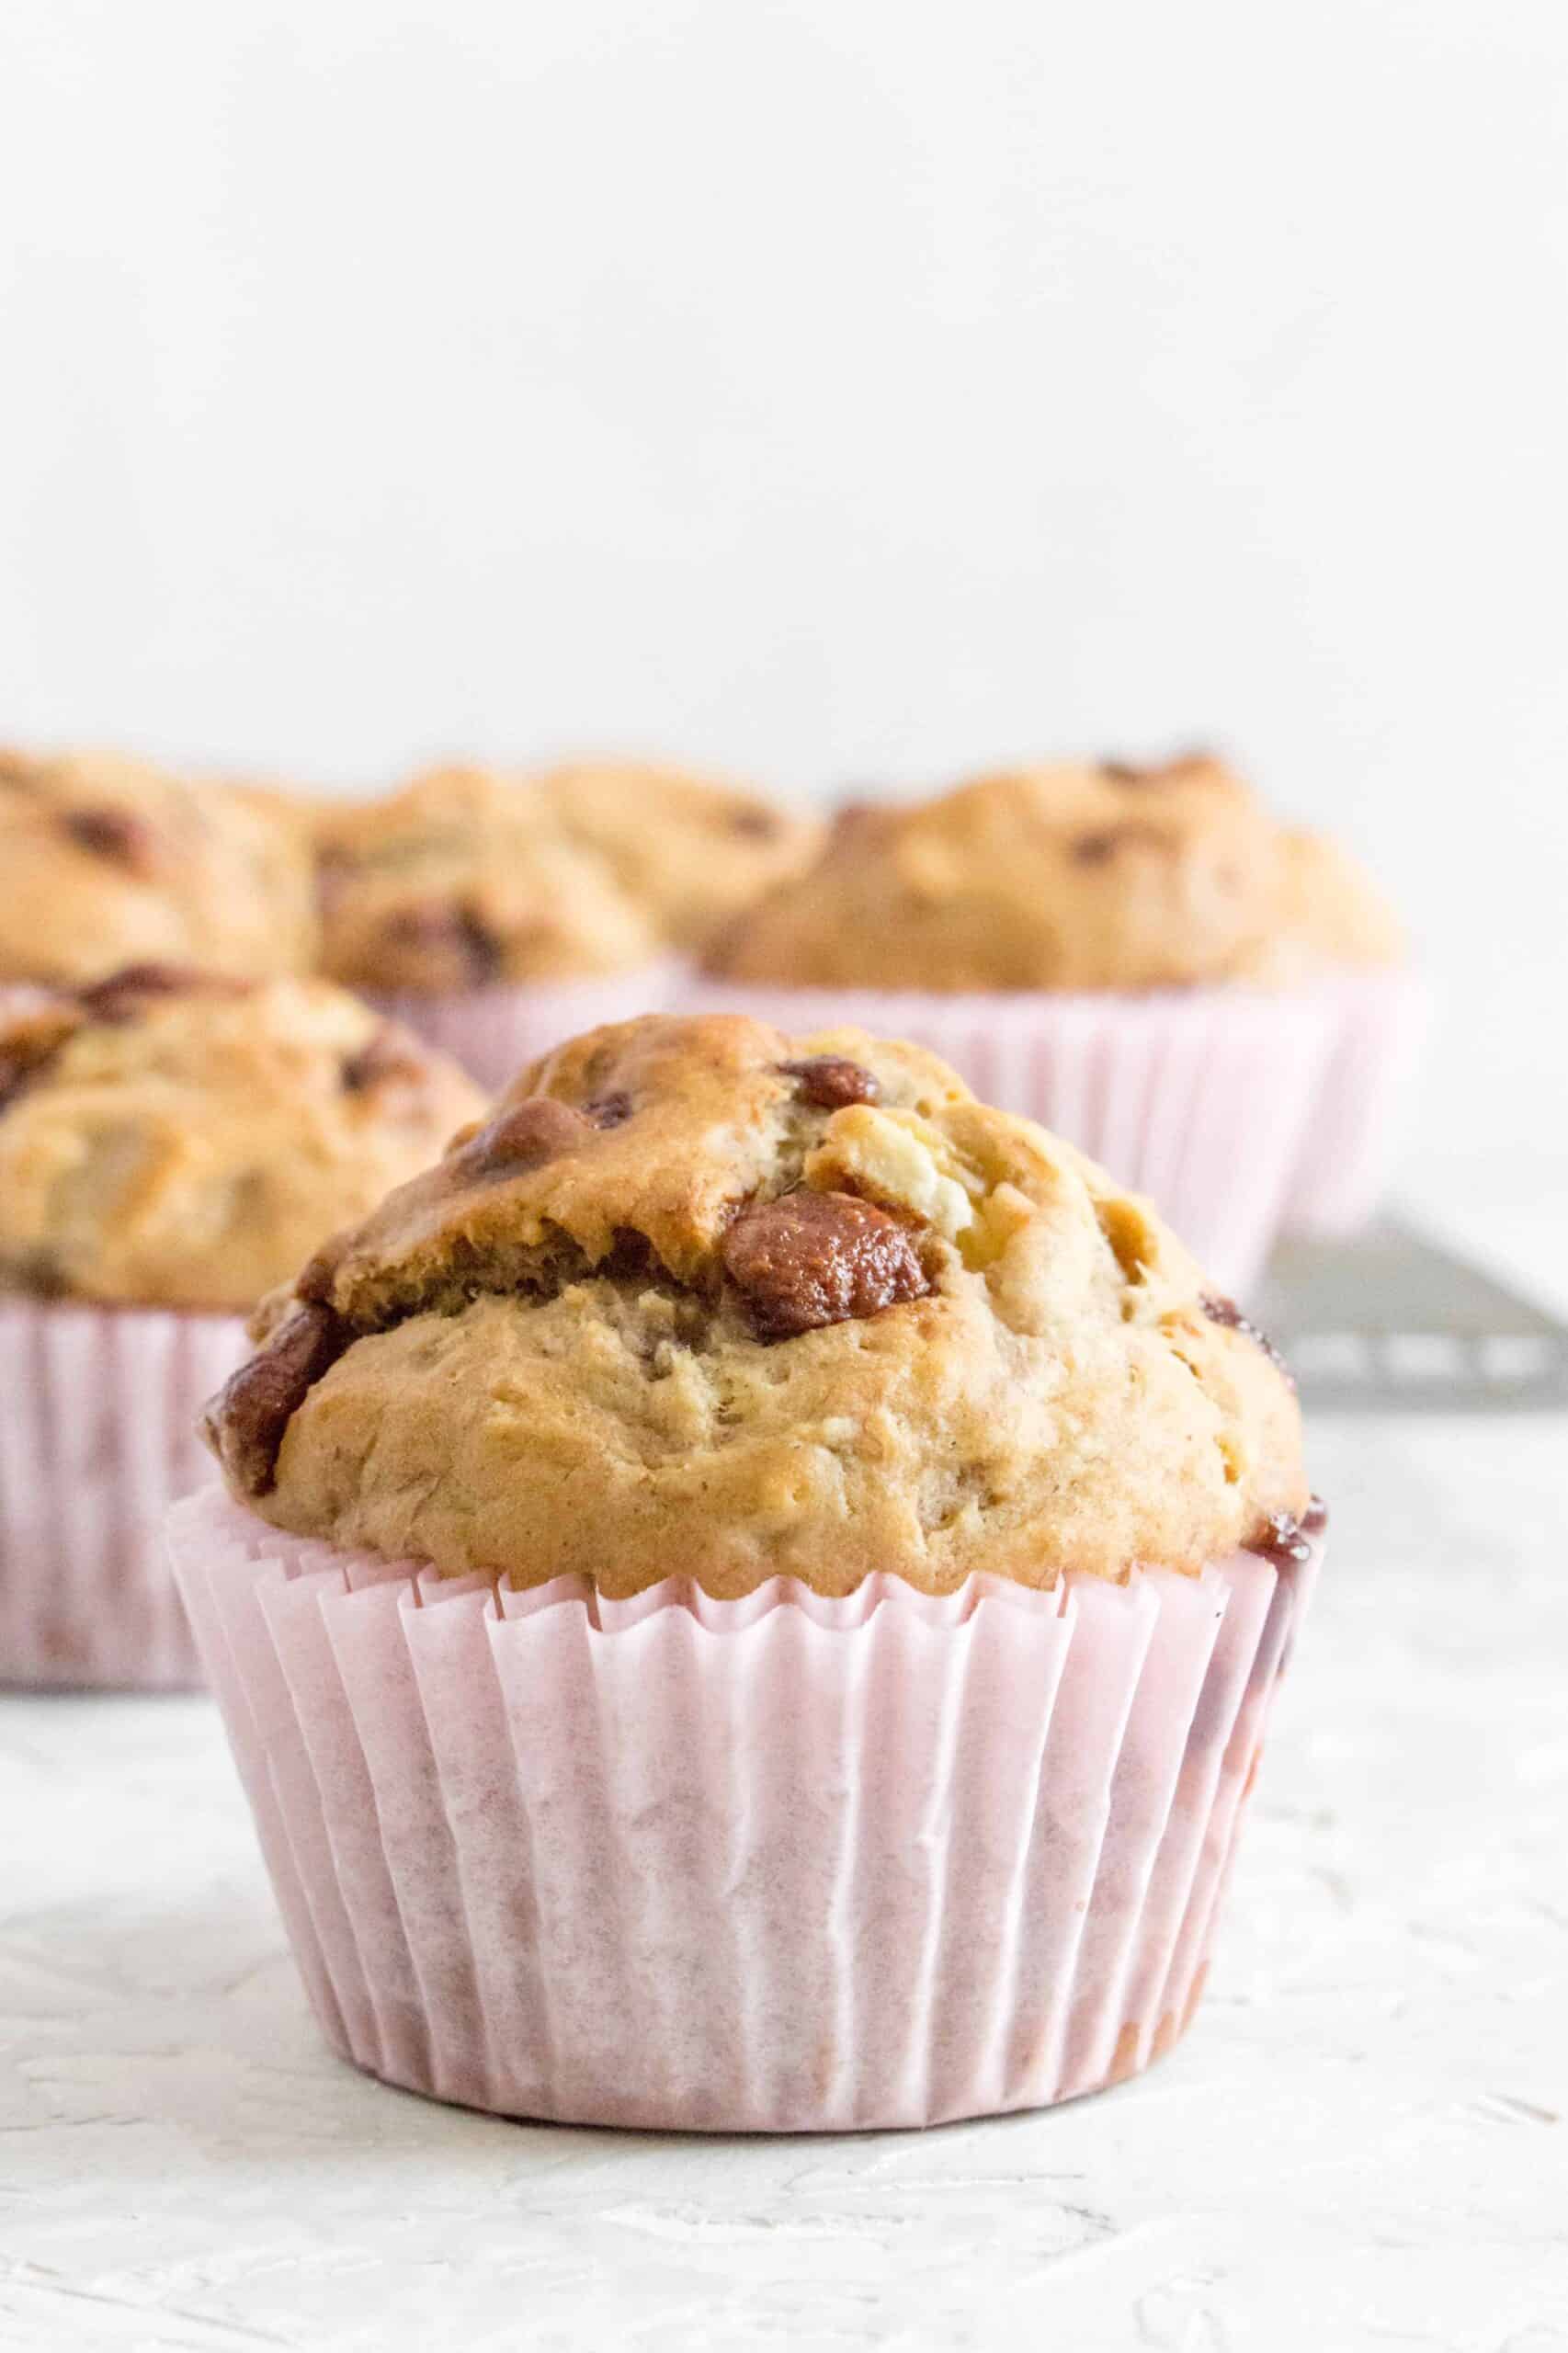 banana chocolate chip muffin in pink muffin liner